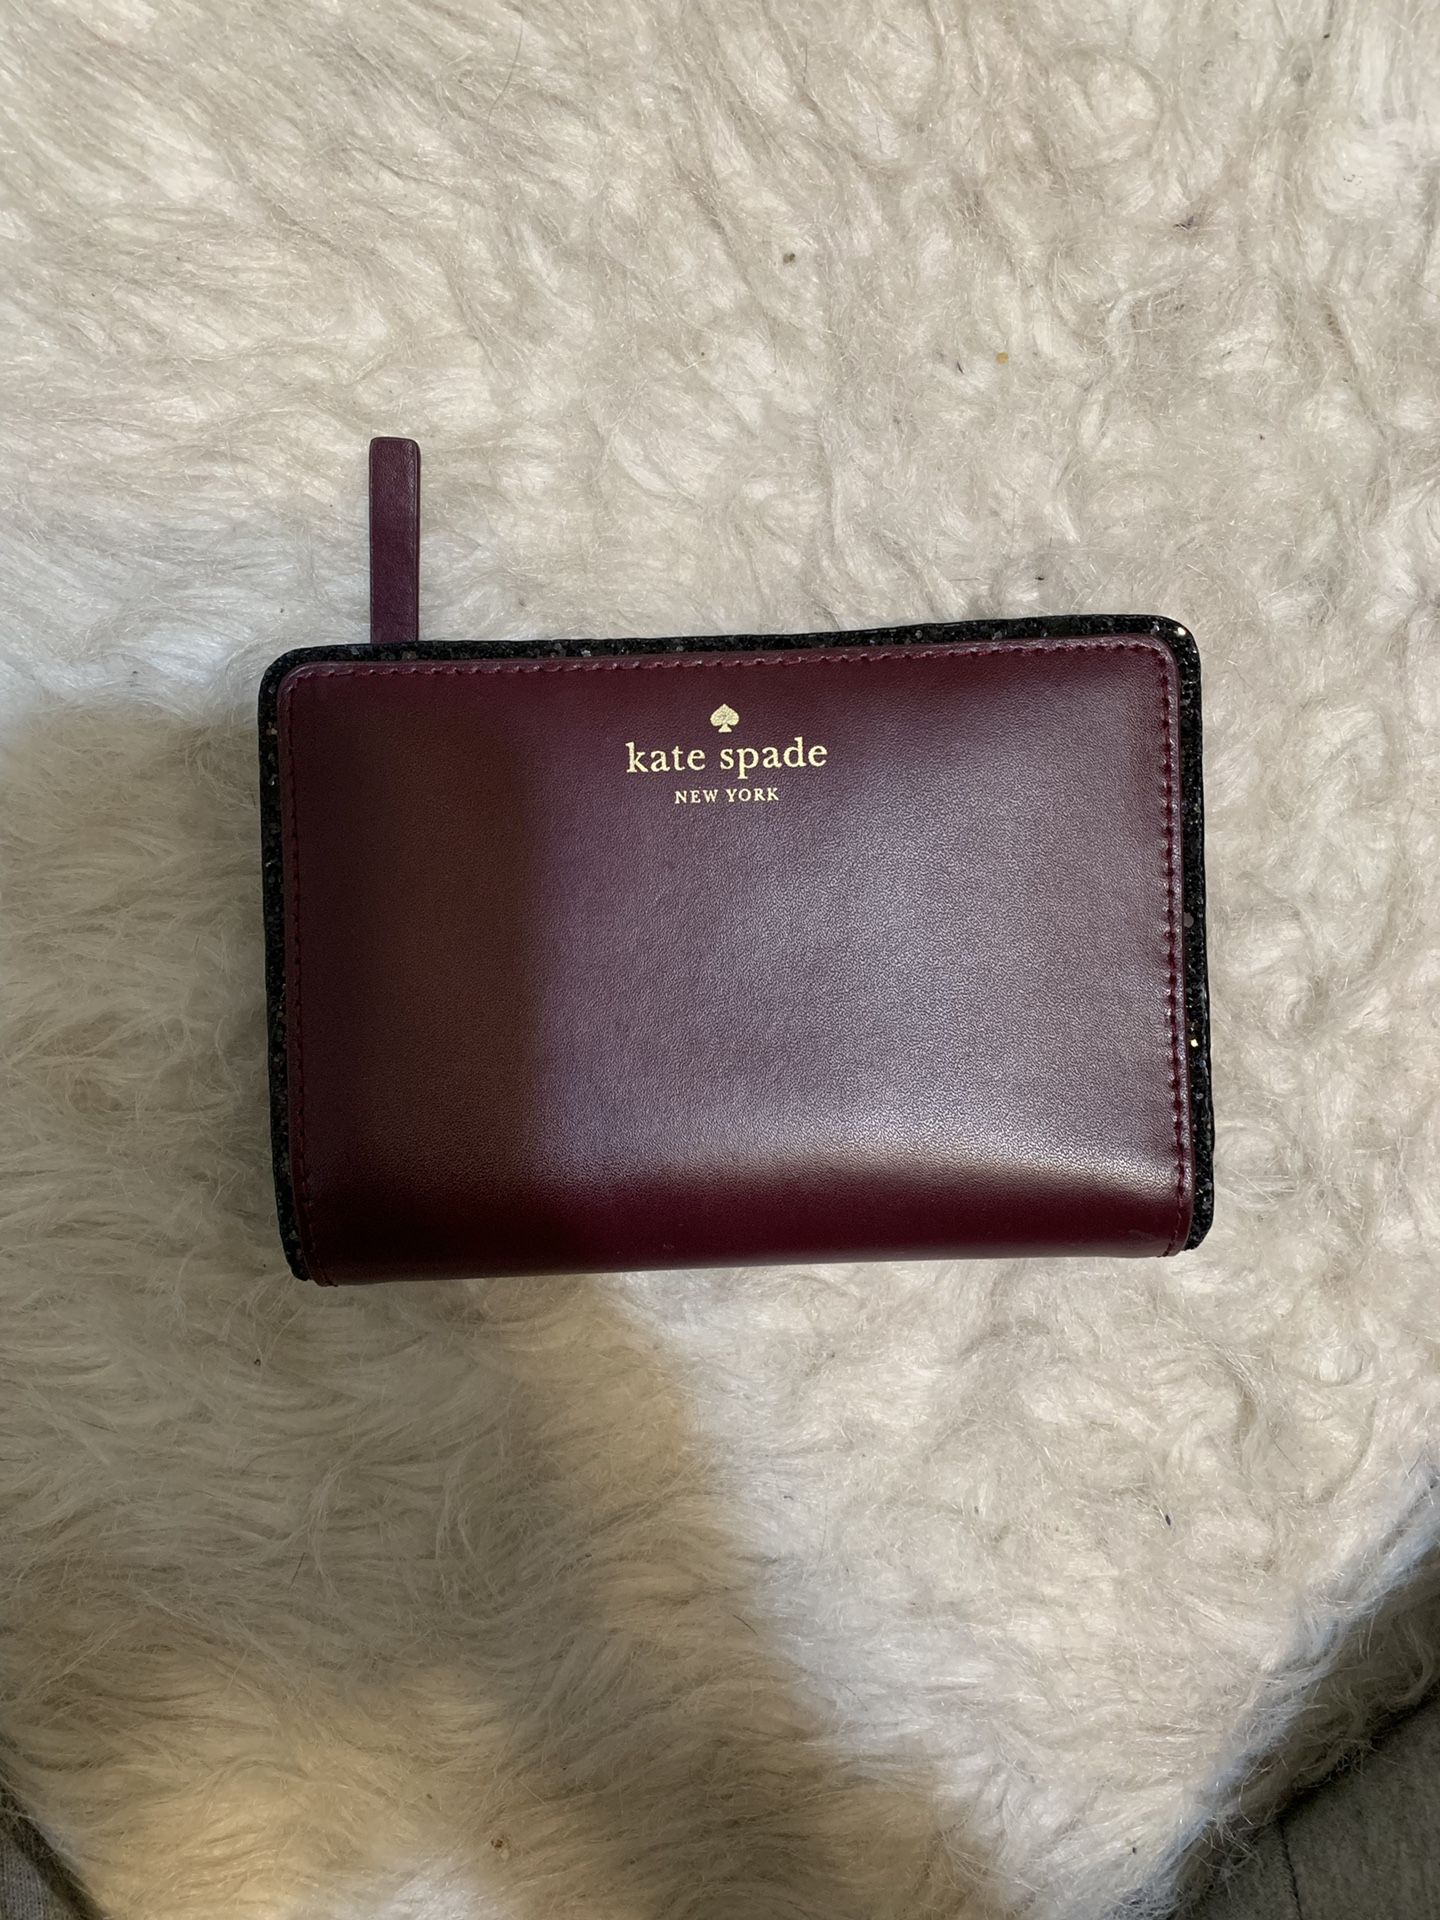 Late spade limited time wallet